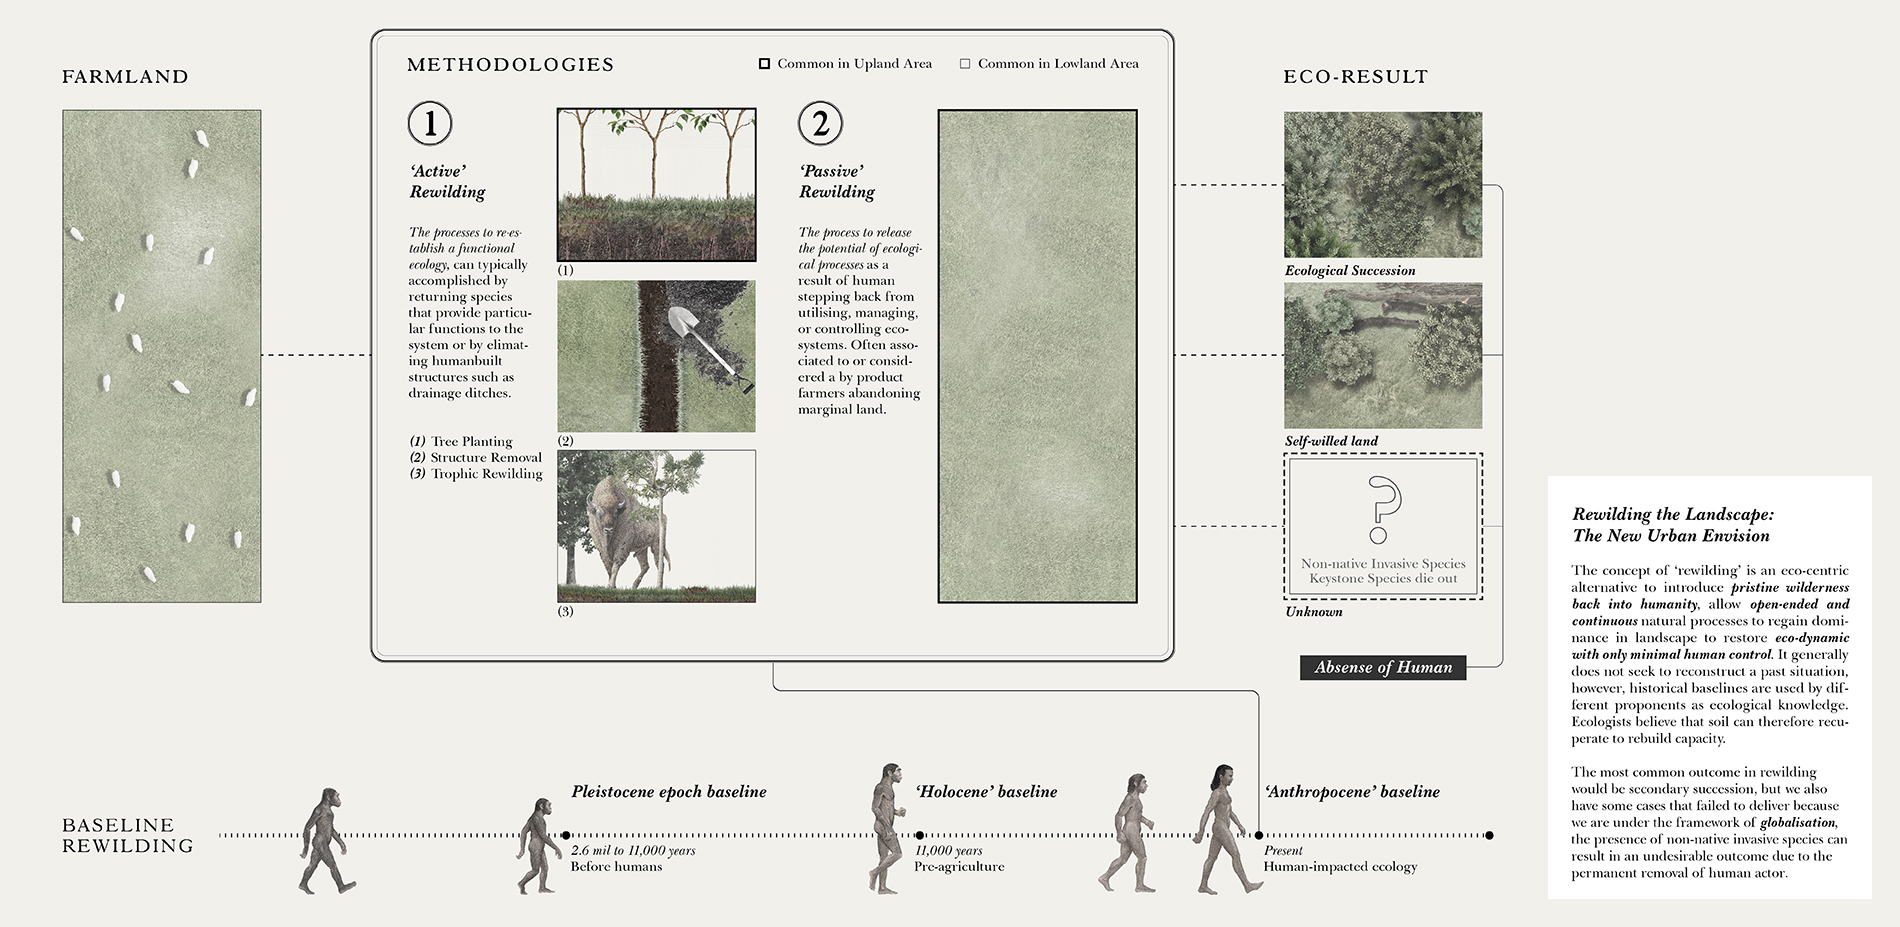 Rewilding the Landscape: The New Urban Envision